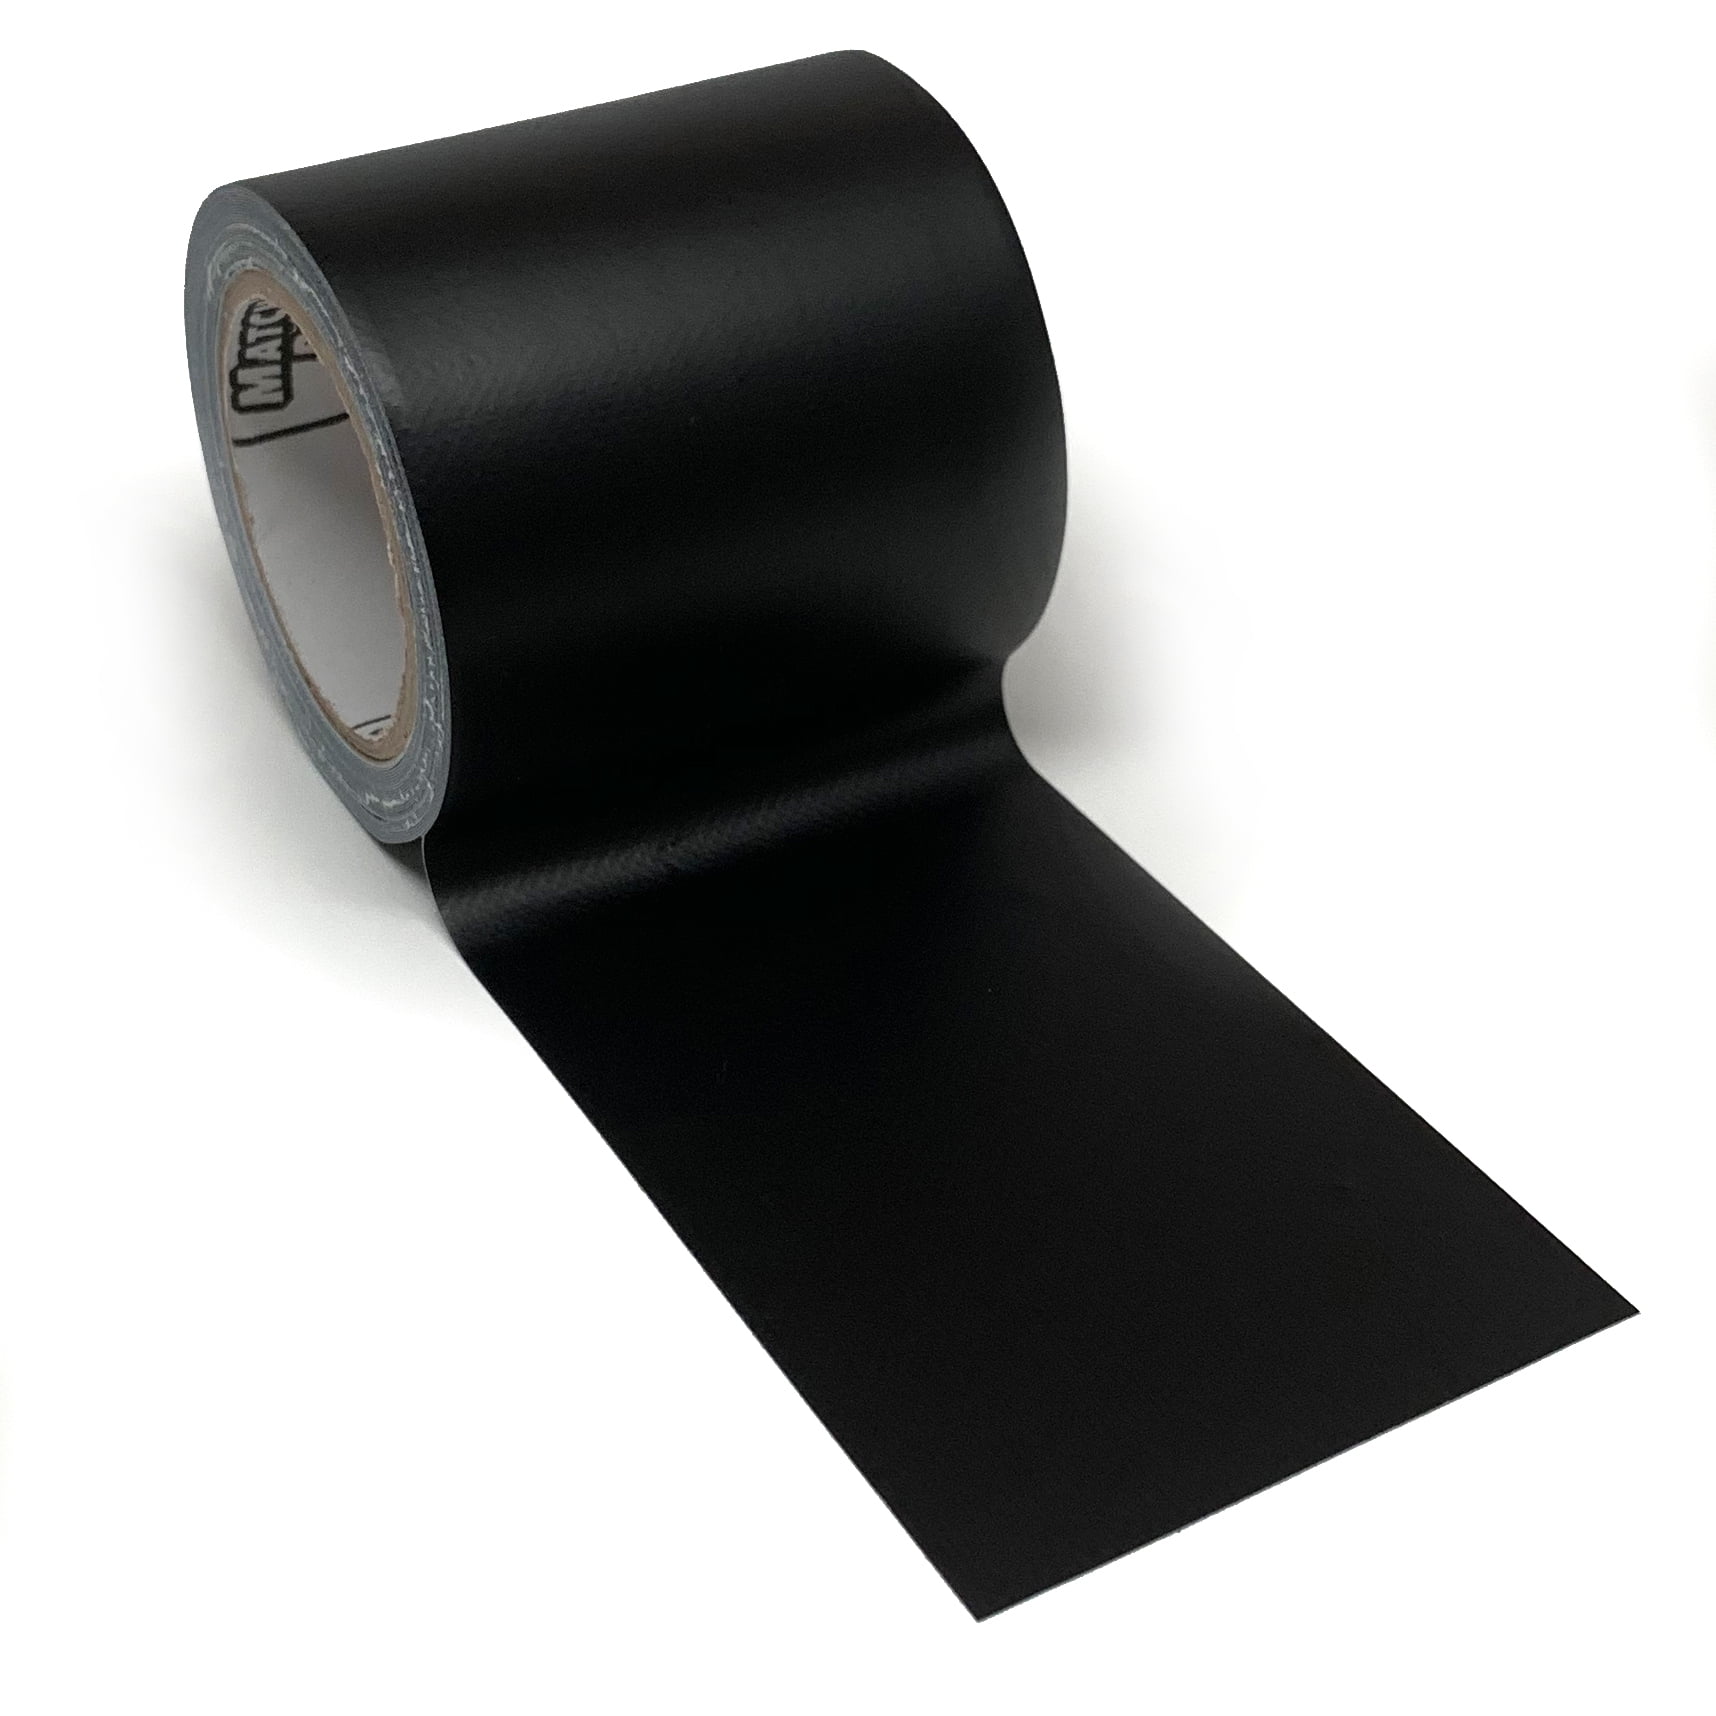 Match 'N Patch Black Leather Repair Tape, 2.25 in. x 15 ft